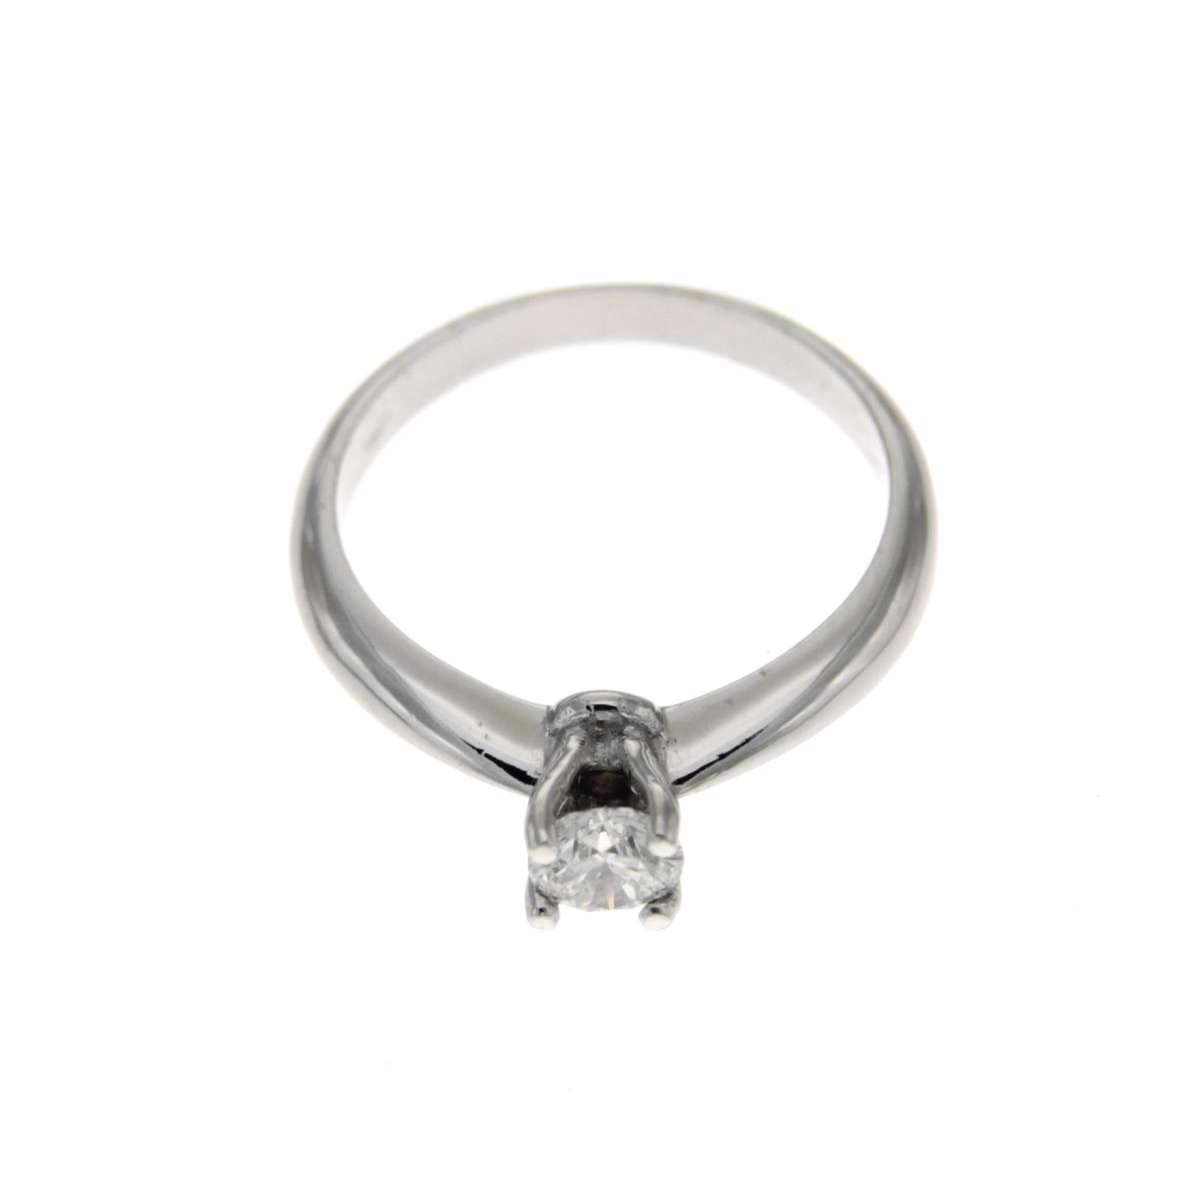 4-prong Solitaire Ring with GIA Certified 0.43 ct F-VS2 Diamond